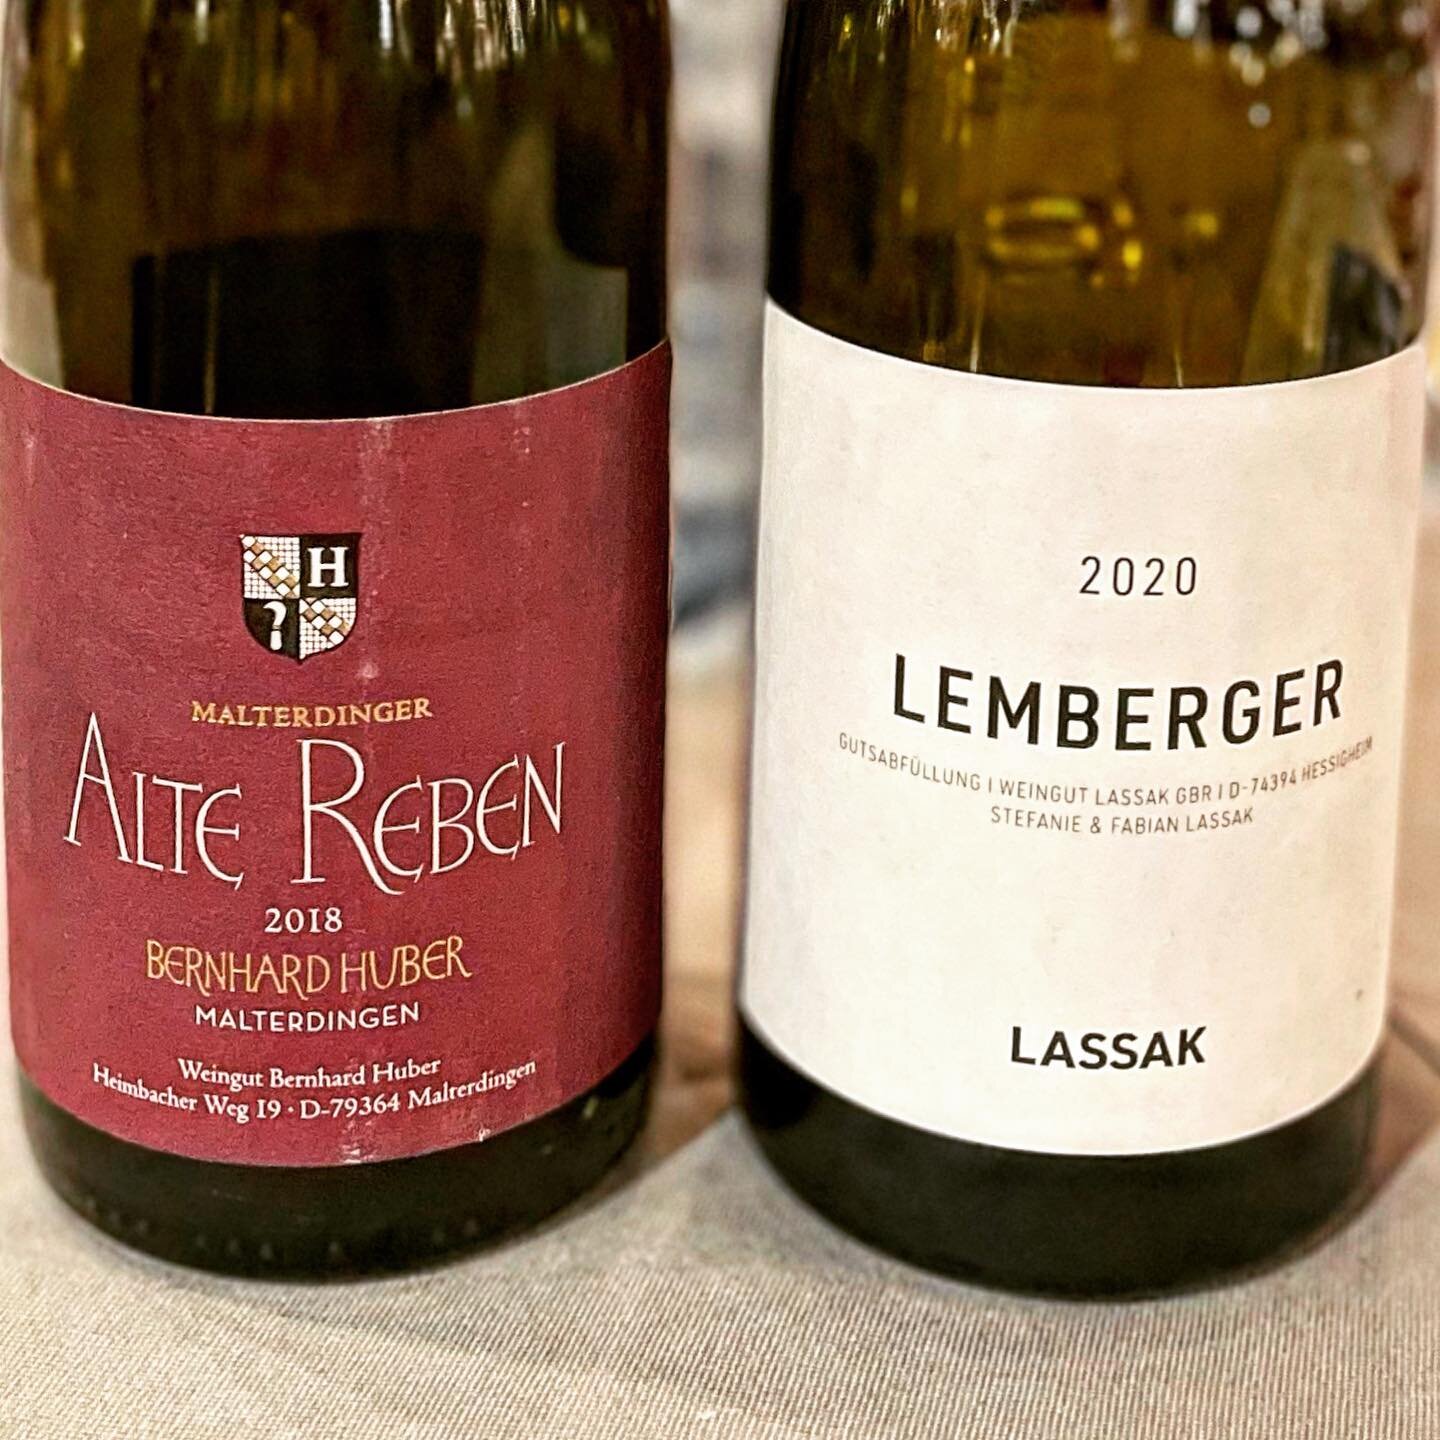 Baden + W&uuml;rttemberg

After several days adrift in wine no-man's land, what a pleasure to find and drink these two beauties of the German south side by side tonight. Sp&auml;tburgunder of expansive warmth, suppleness, and engaging complexity juxt